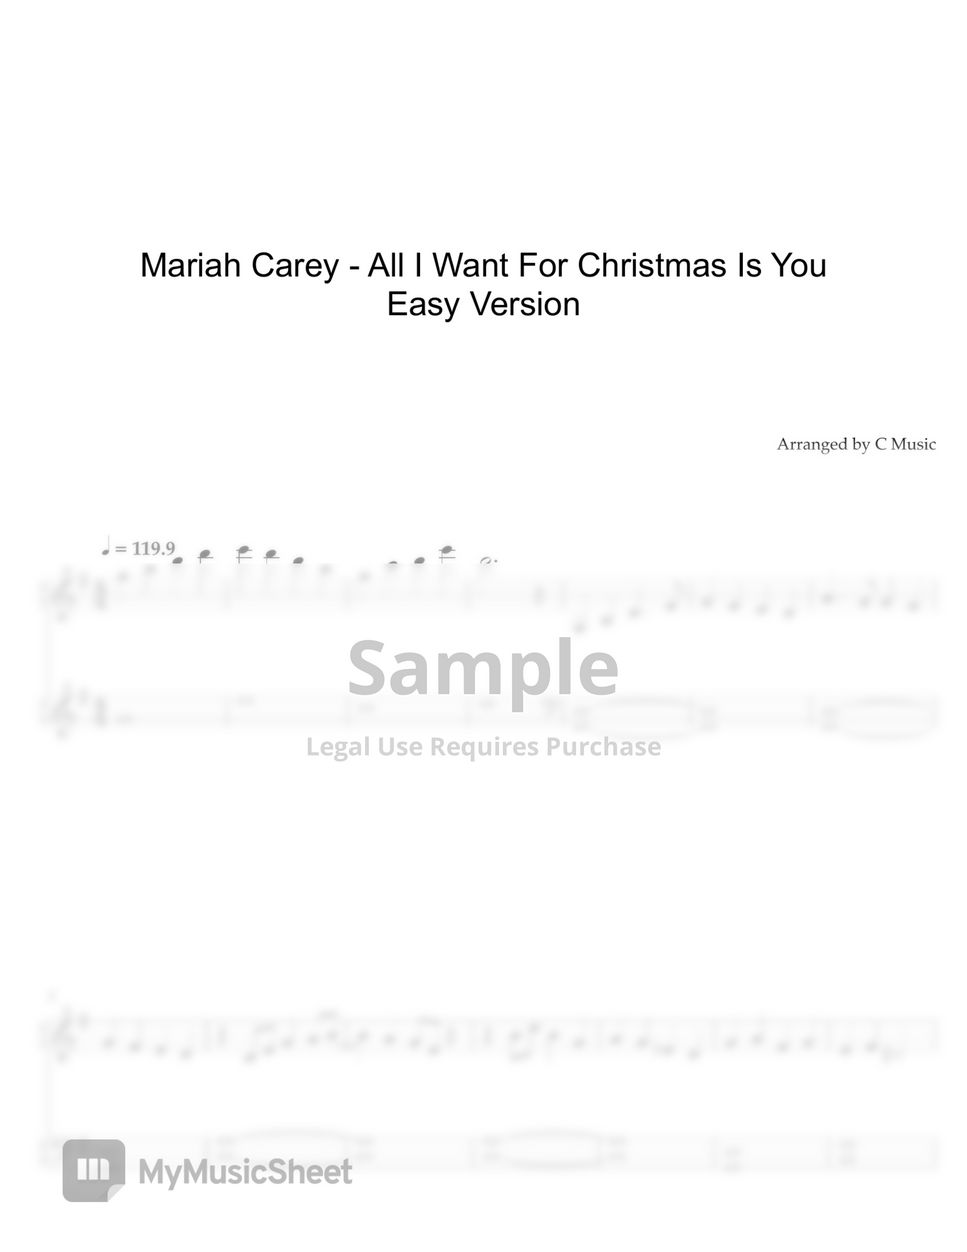 Mariah Carey - All I Want for Christmas Is You (Easy Version) by C Music